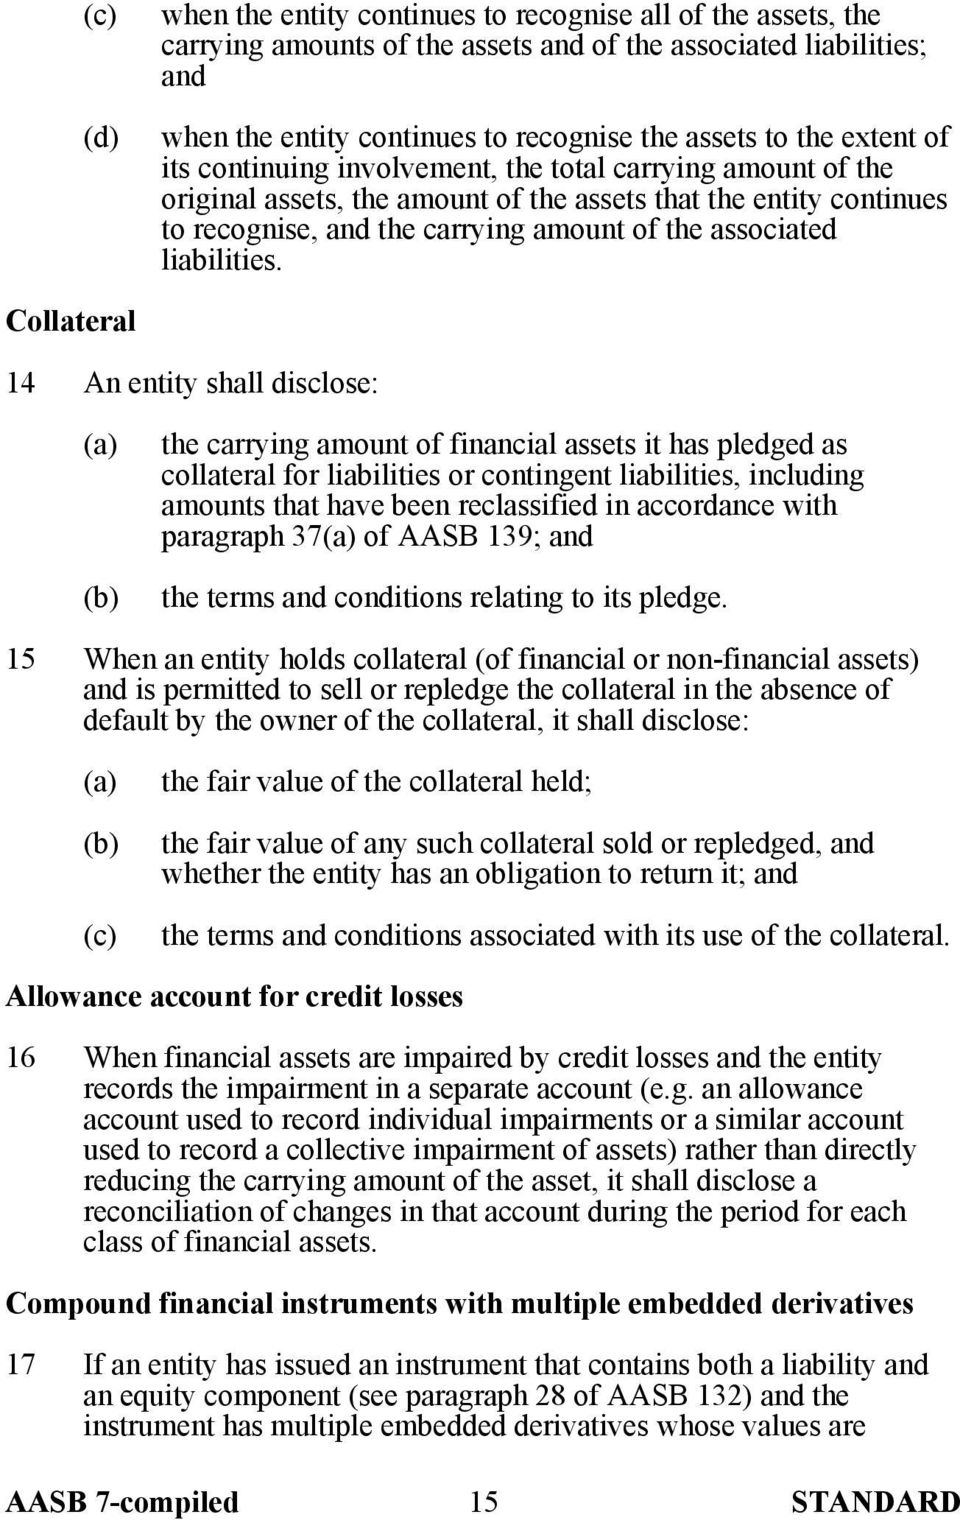 Collateral 14 An entity shall disclose: the carrying amount of financial assets it has pledged as collateral for liabilities or contingent liabilities, including amounts that have been reclassified